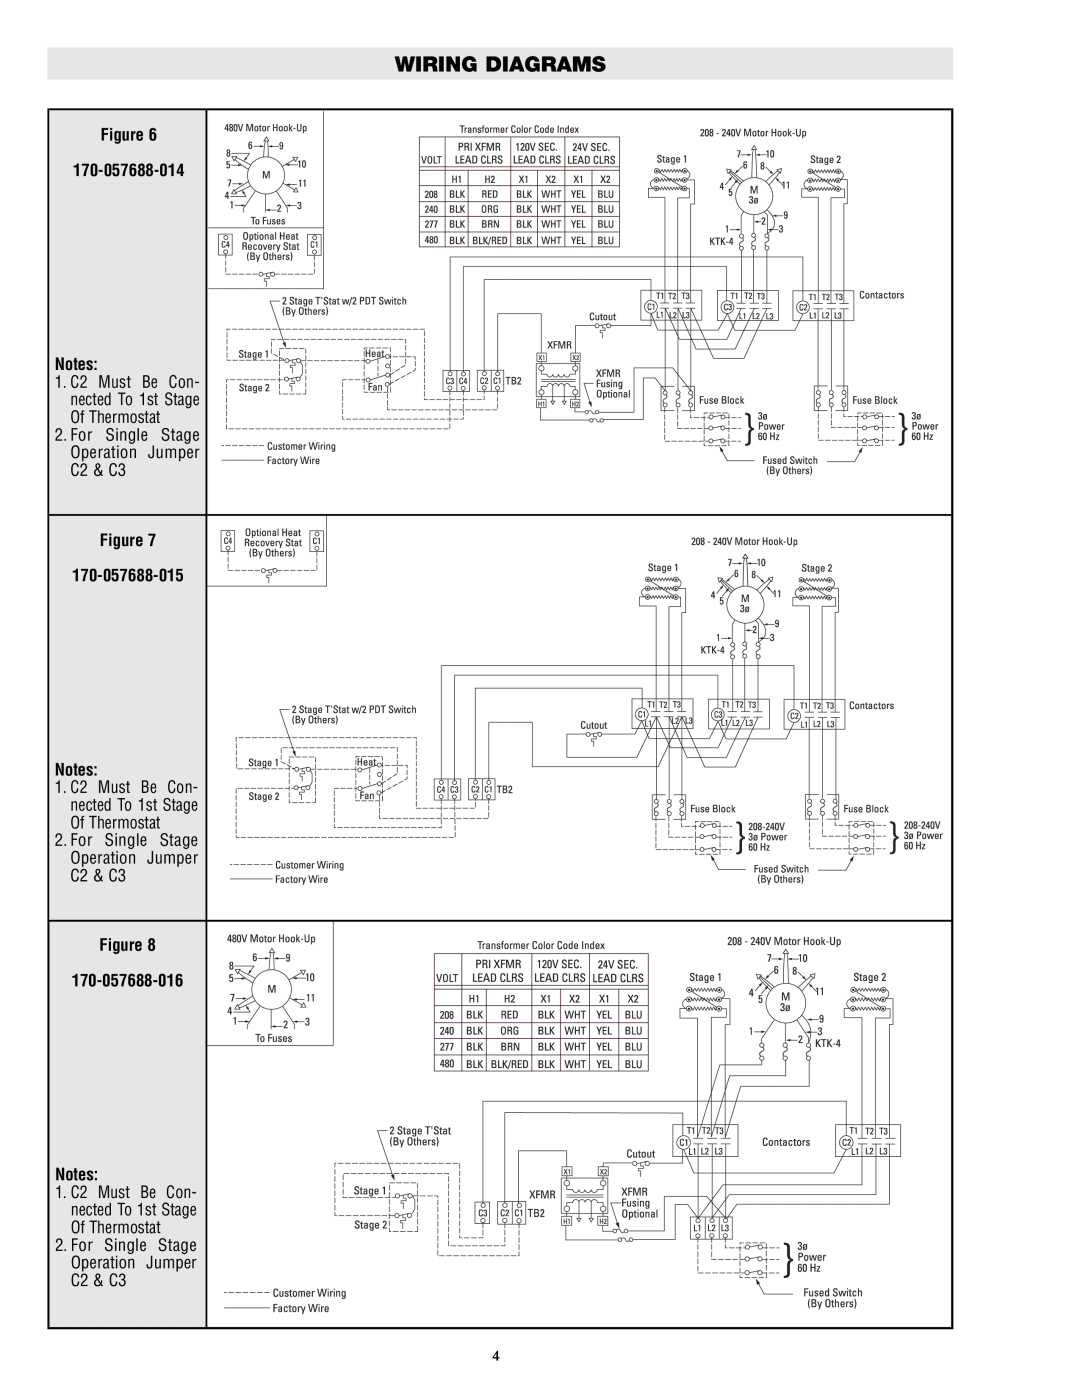 Chromalox PF452-4 057688-014 Notes, 057688-015 Notes, 057688-016 Notes, Wiring Diagrams, Of Thermostat 2. For Single Stage 